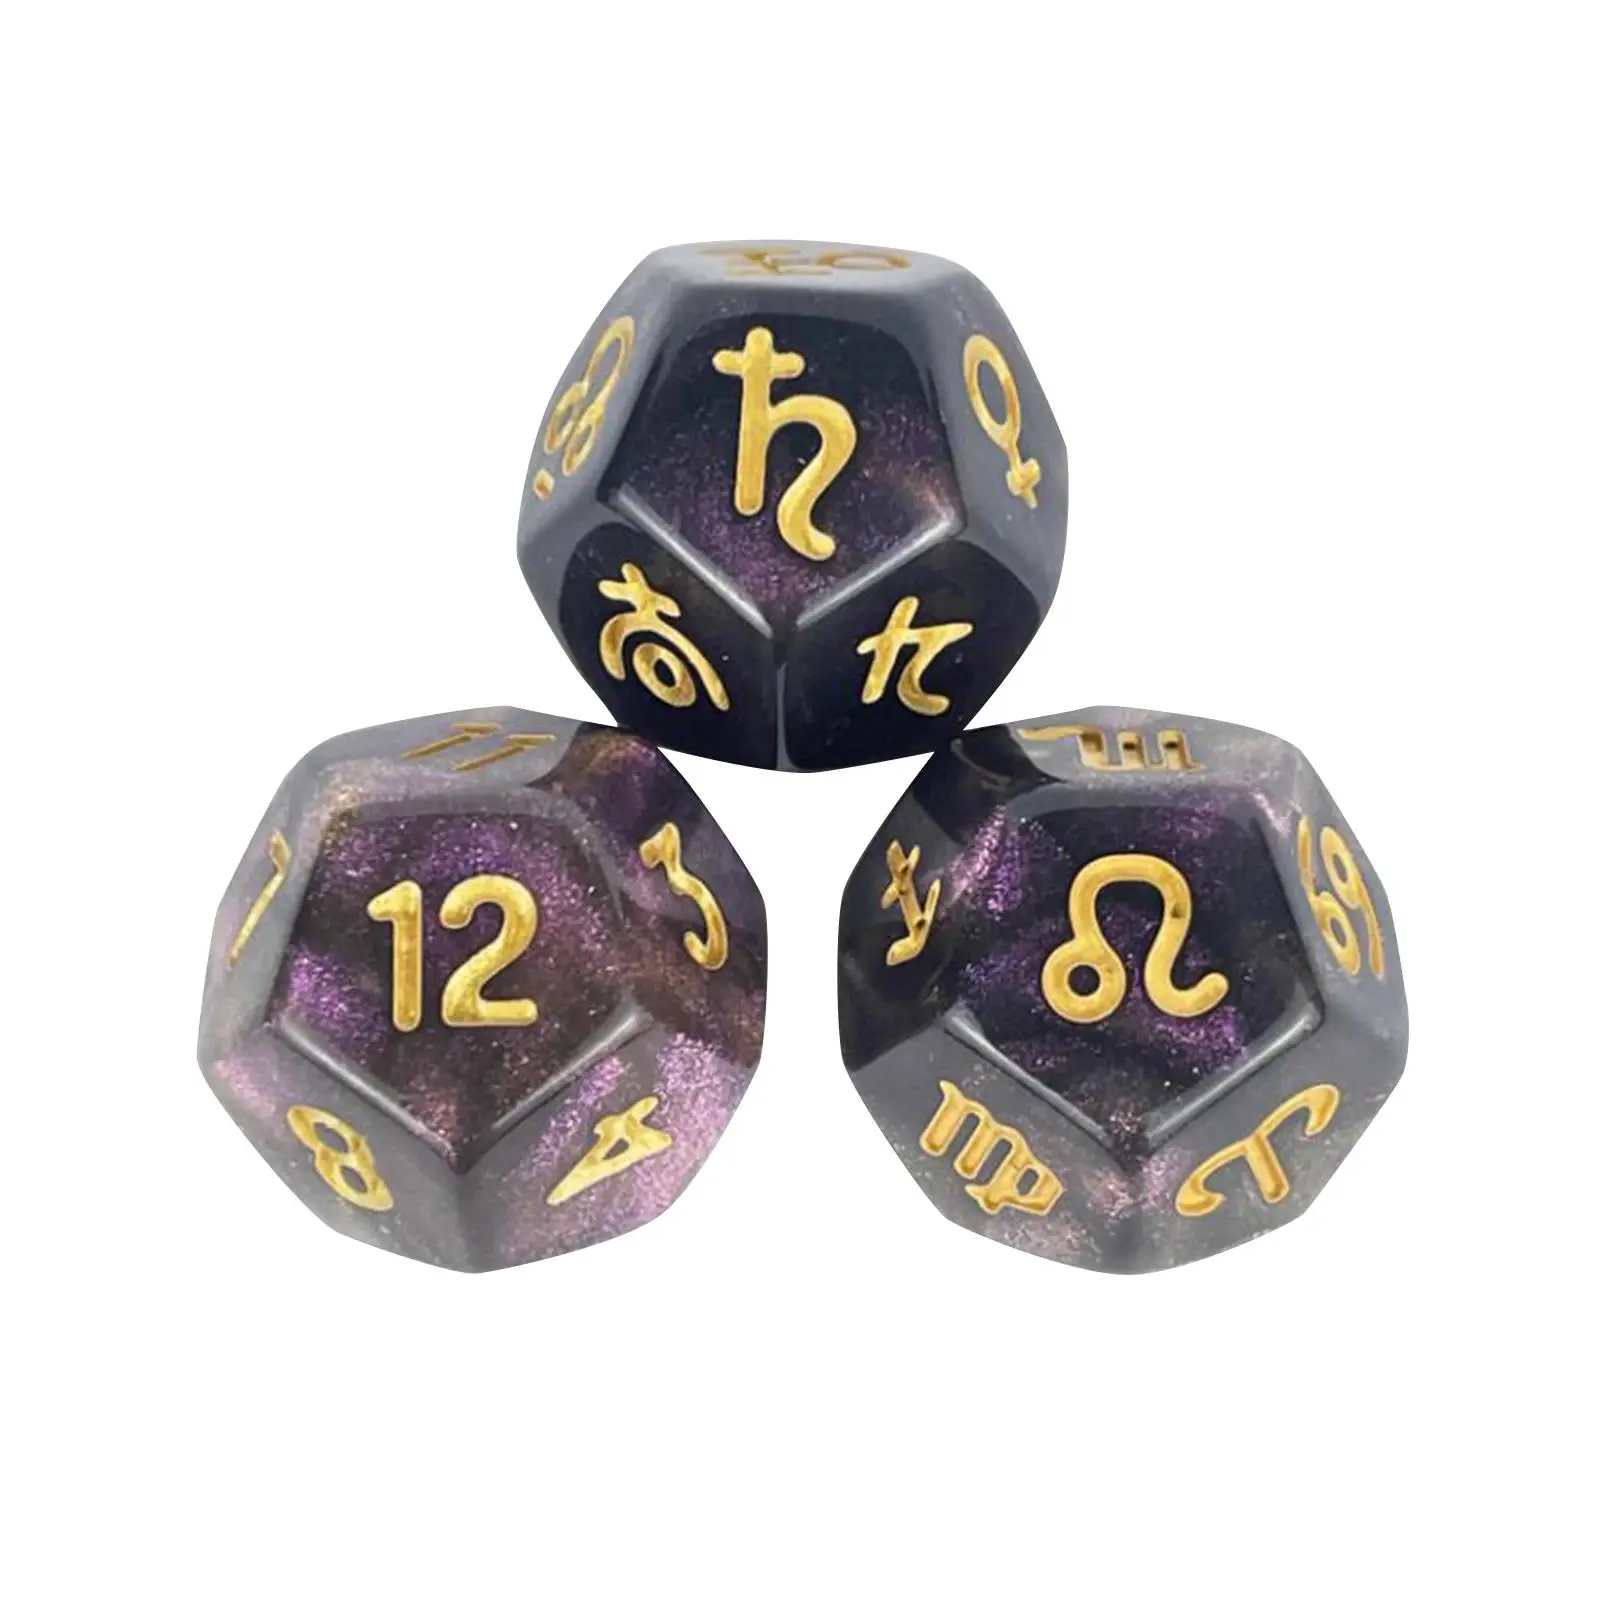 3Pcs Acrylic Astrology Signs Dice, Tarot Cards Dice, Role Playing Game Constellation Dice